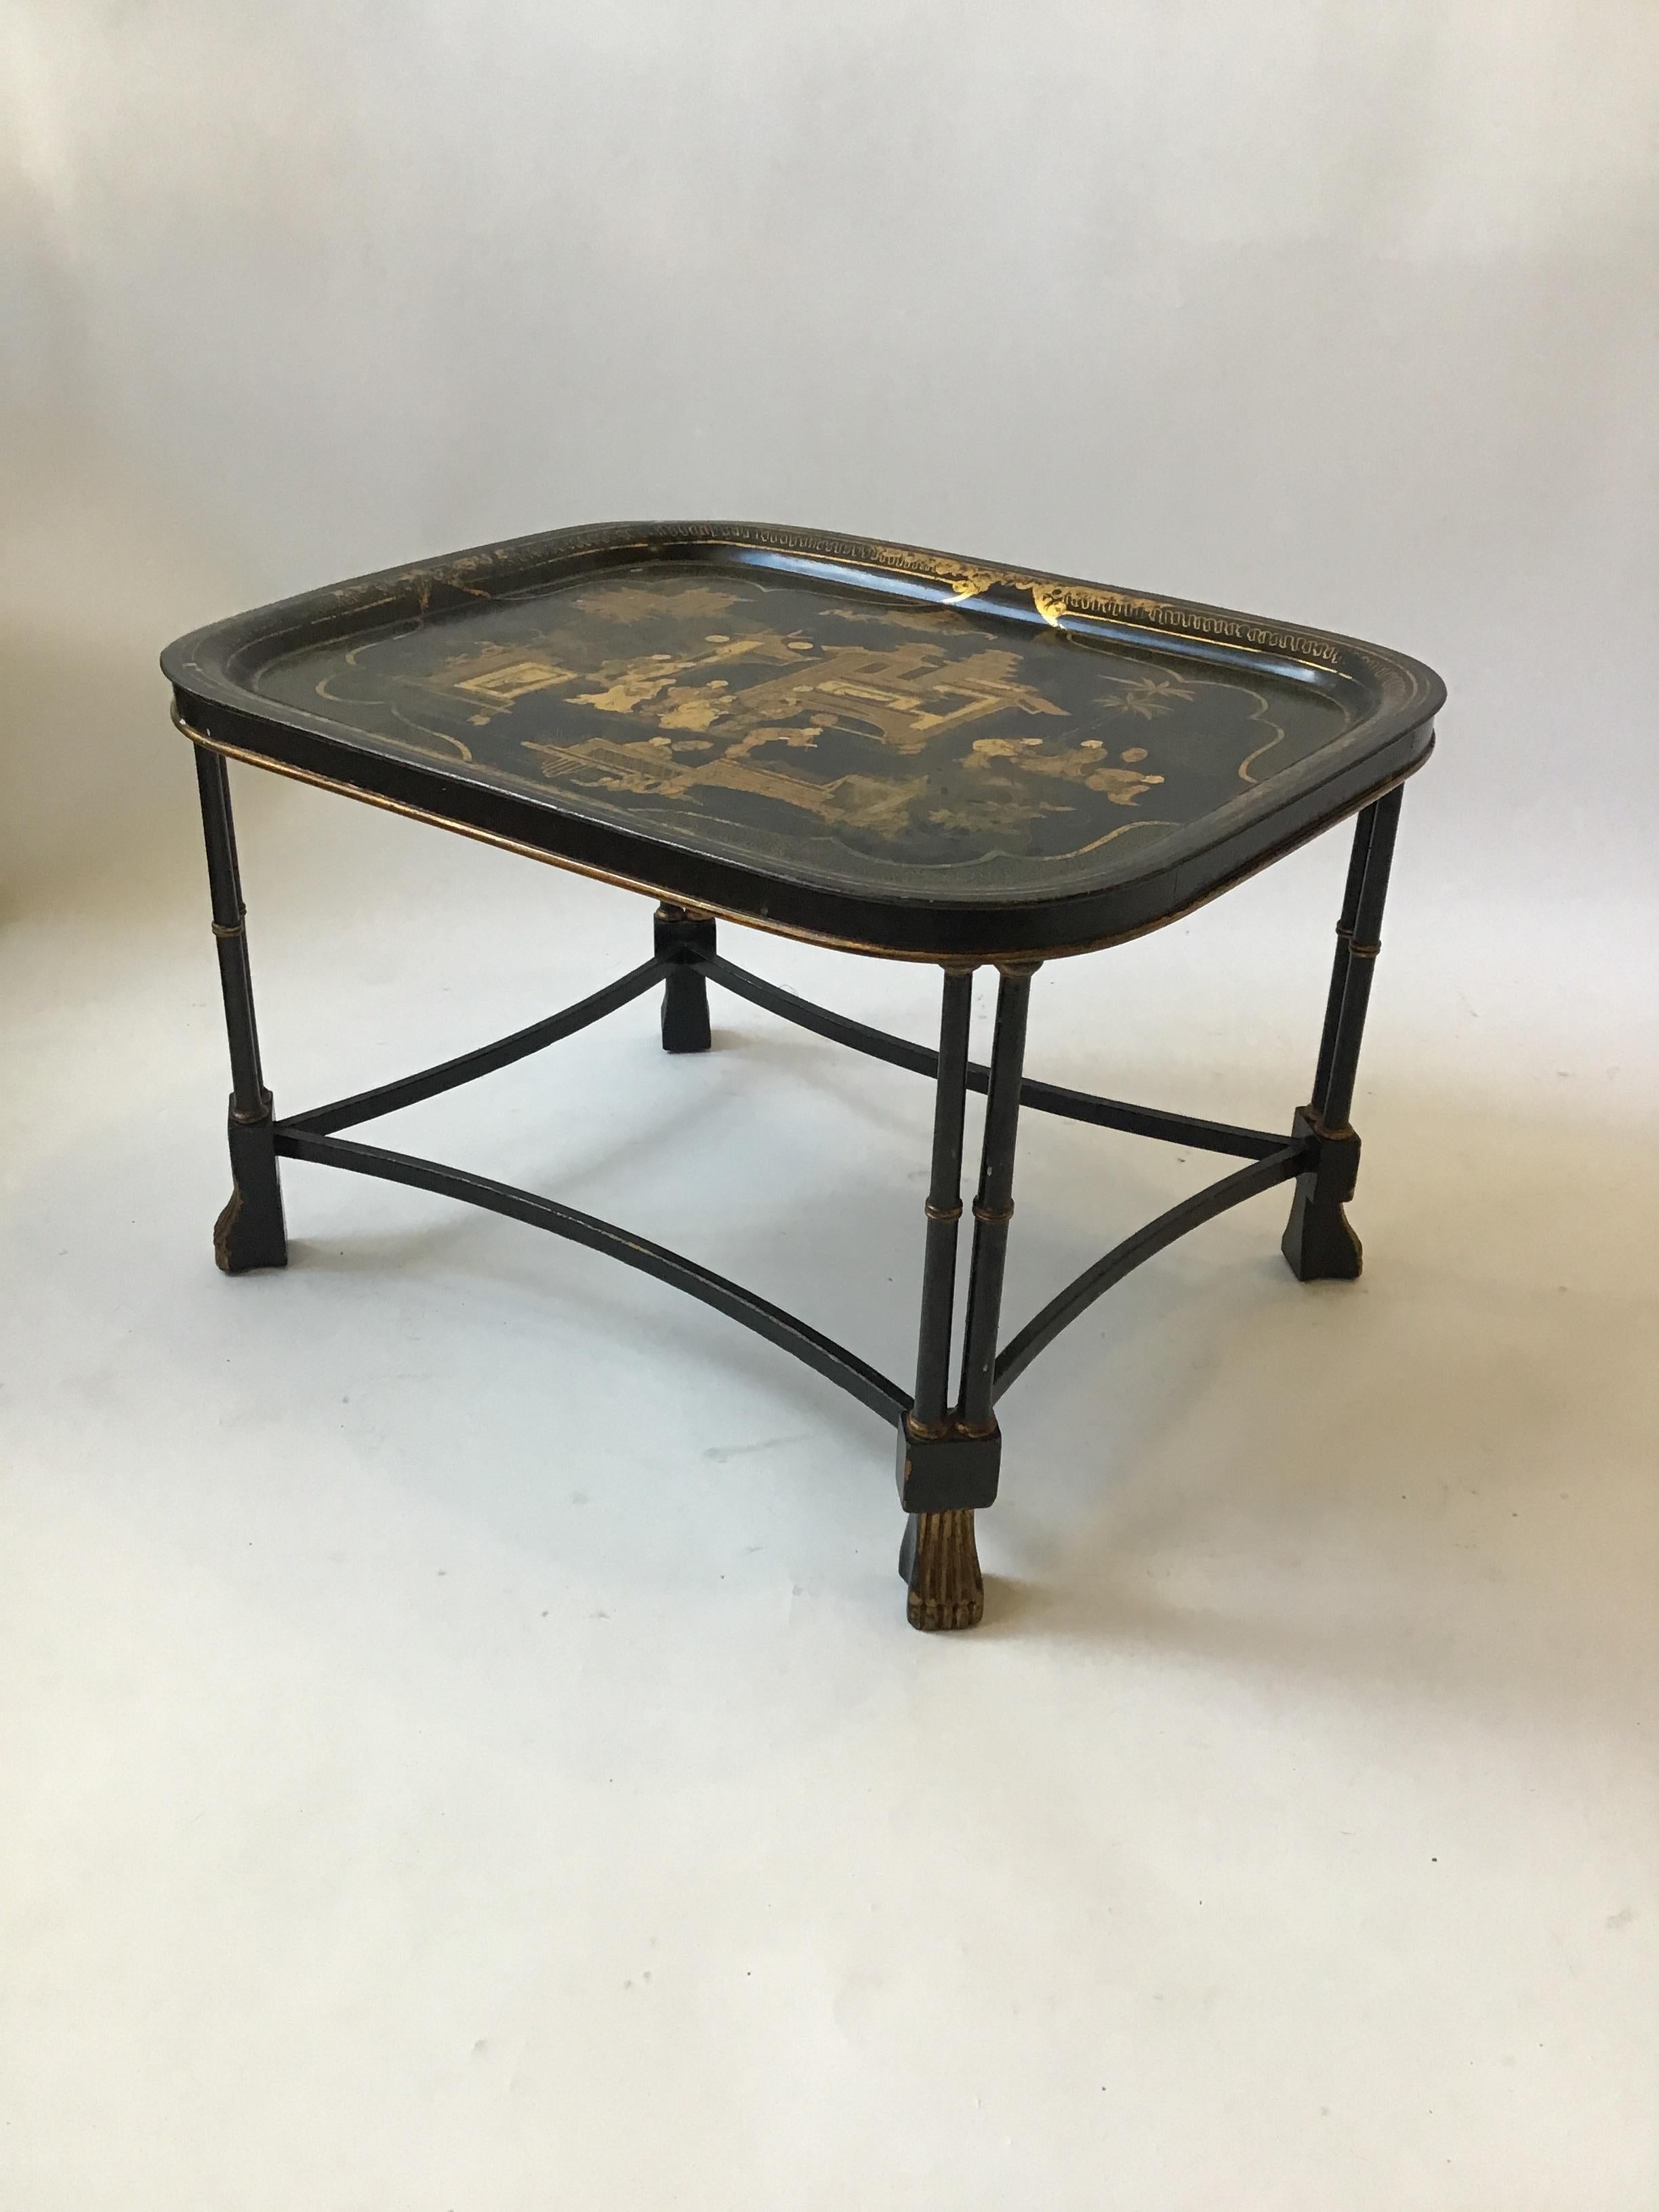 1920s Asian motif tole tray on a wooden stand. Made in England. Tray can be removed.